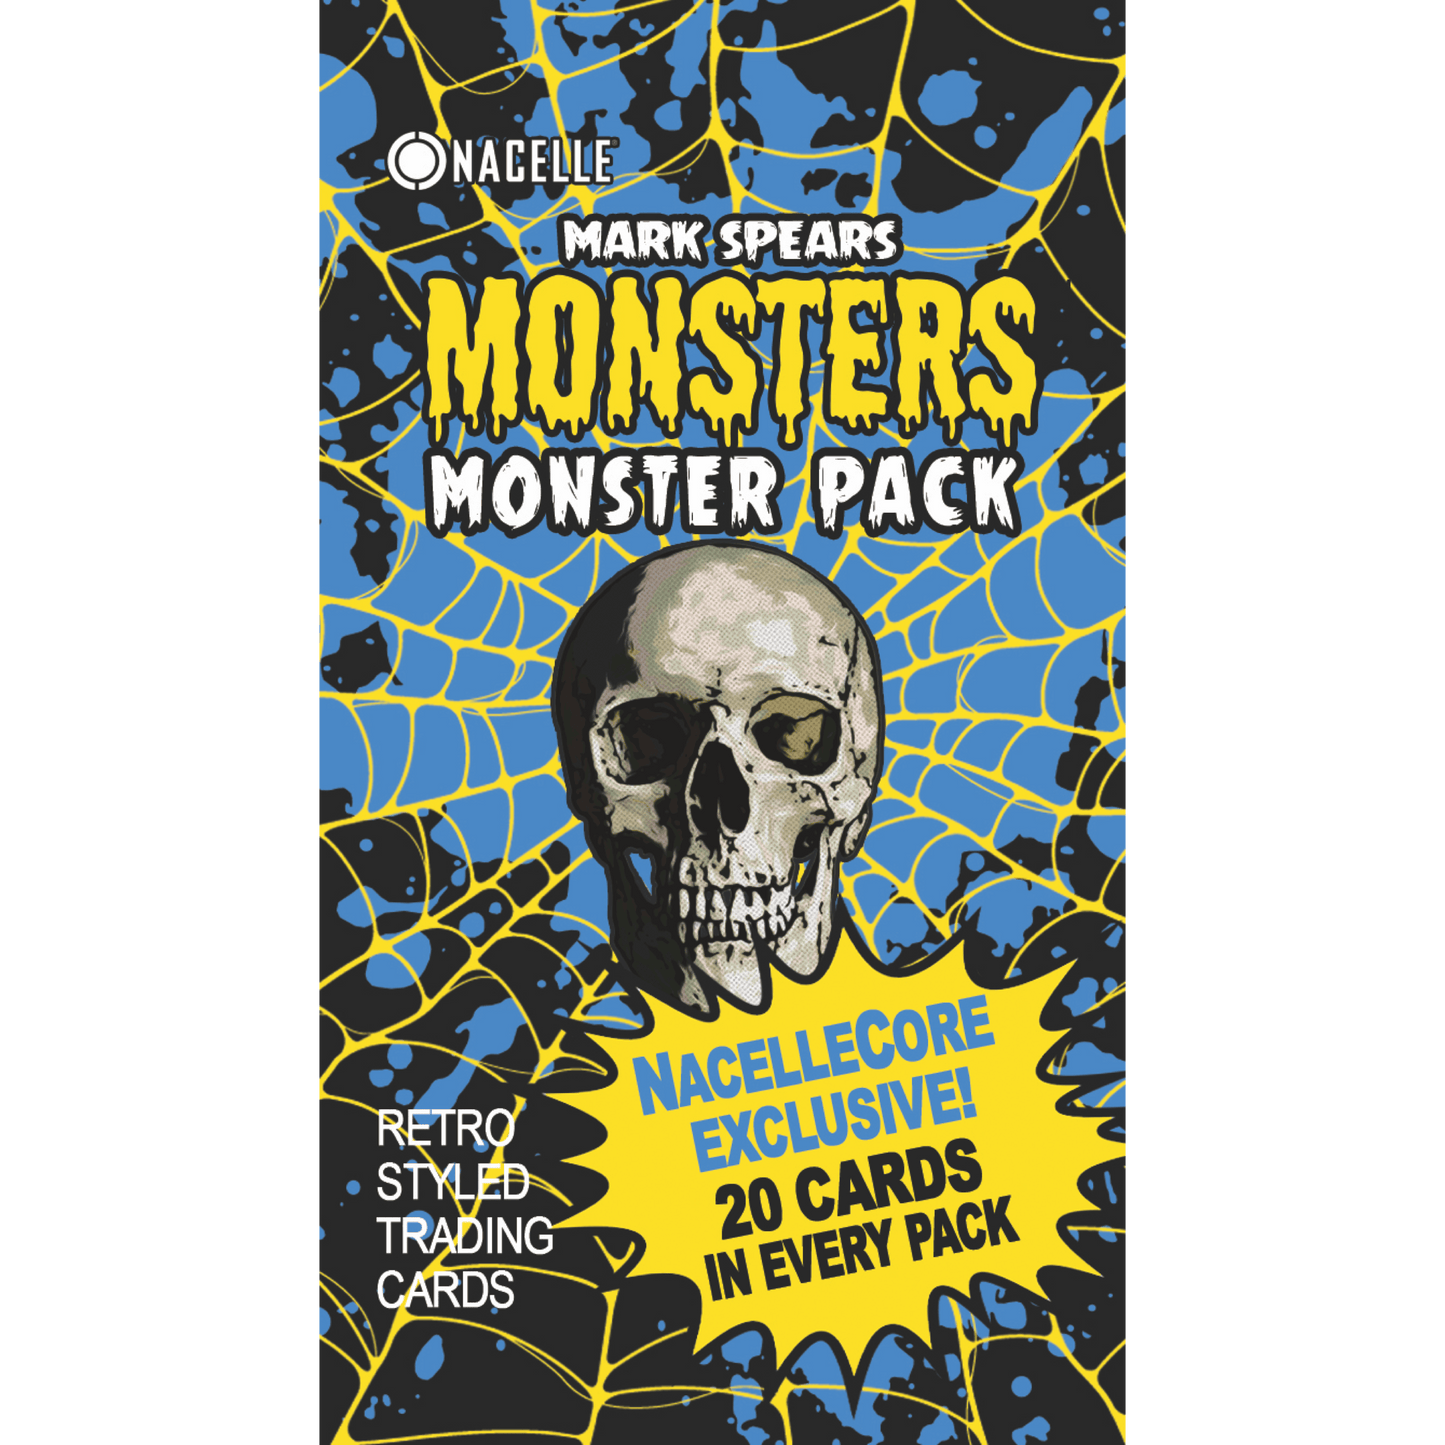 Mark Spears Monsters Trading Cards | Single Pack - Nacelle Exclusive Mixed Series Monster Pack